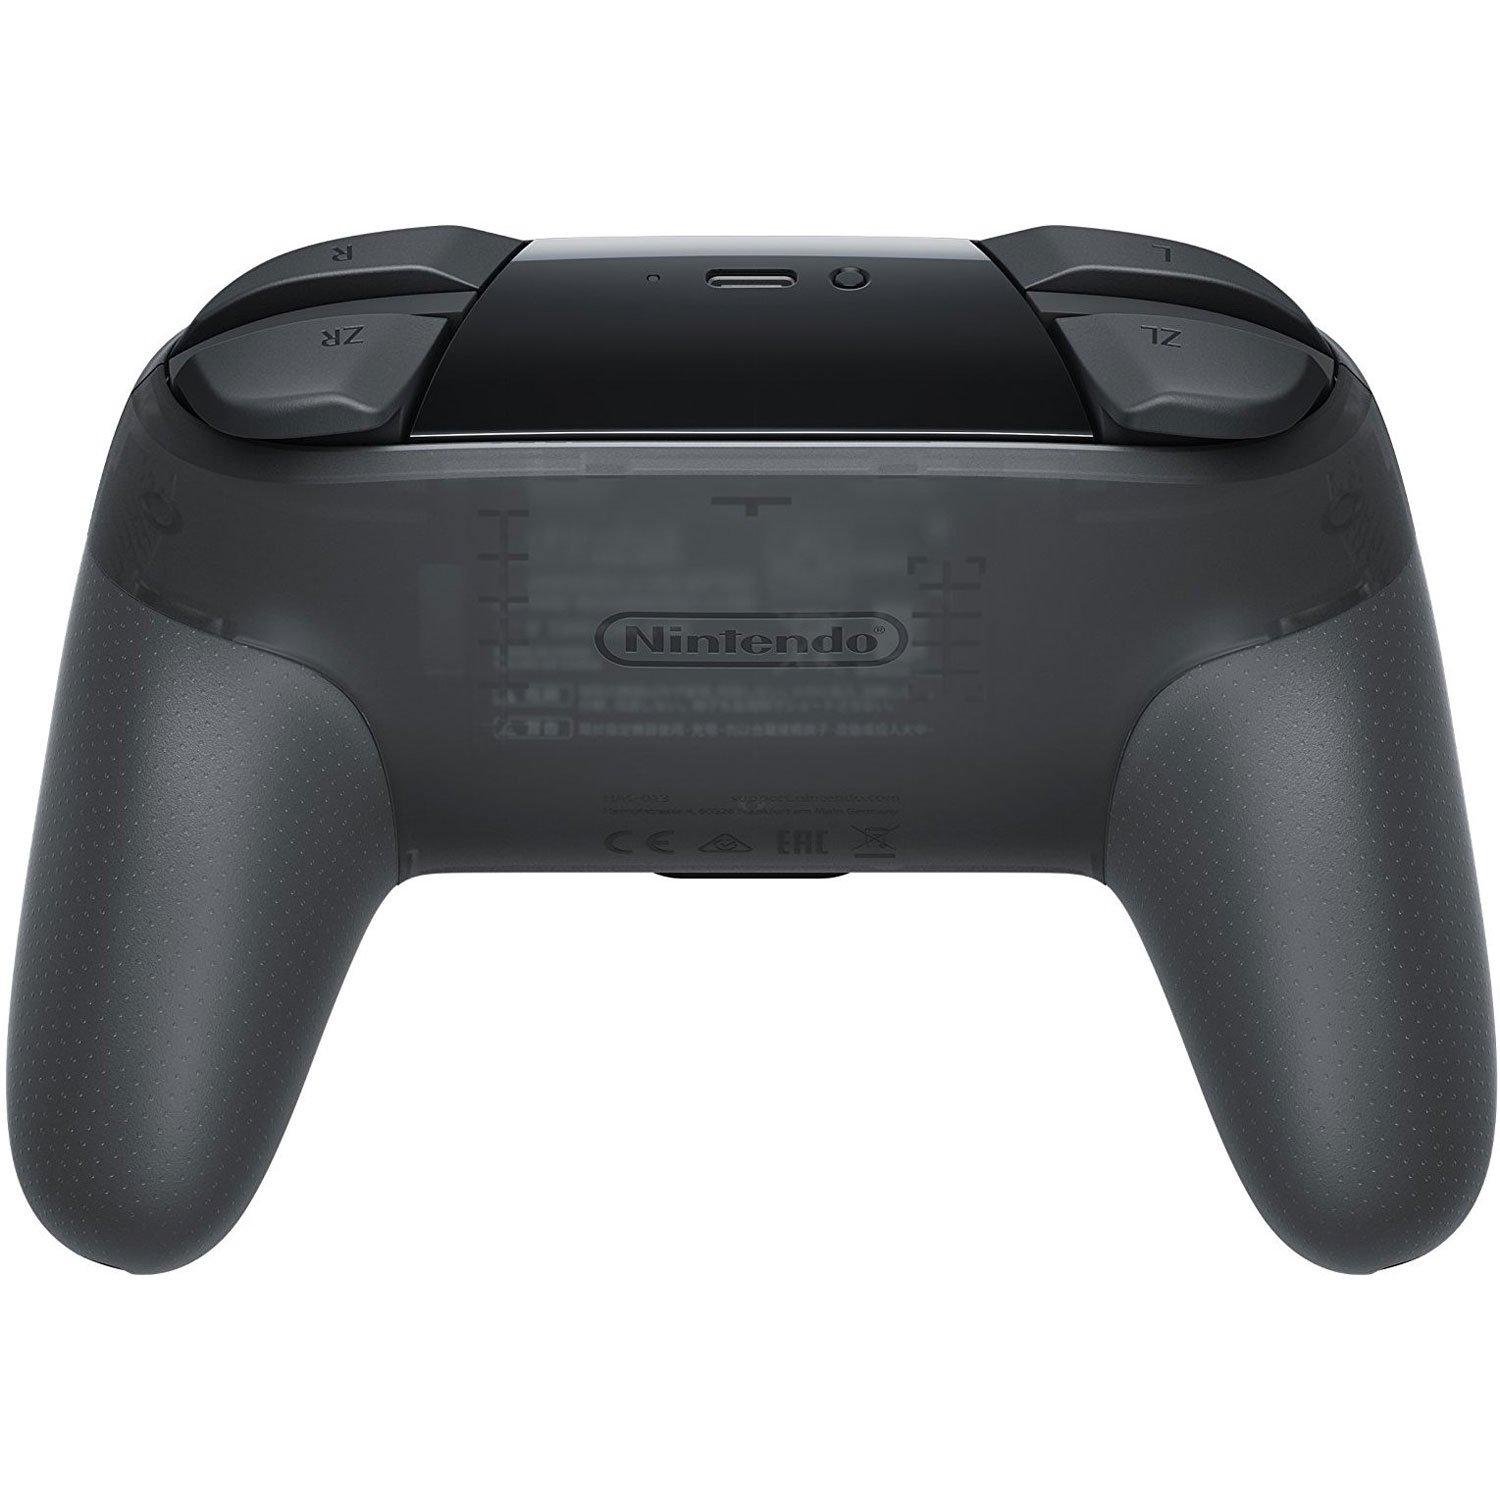 Nintendo Switch Pro Controller - image 2 of 5